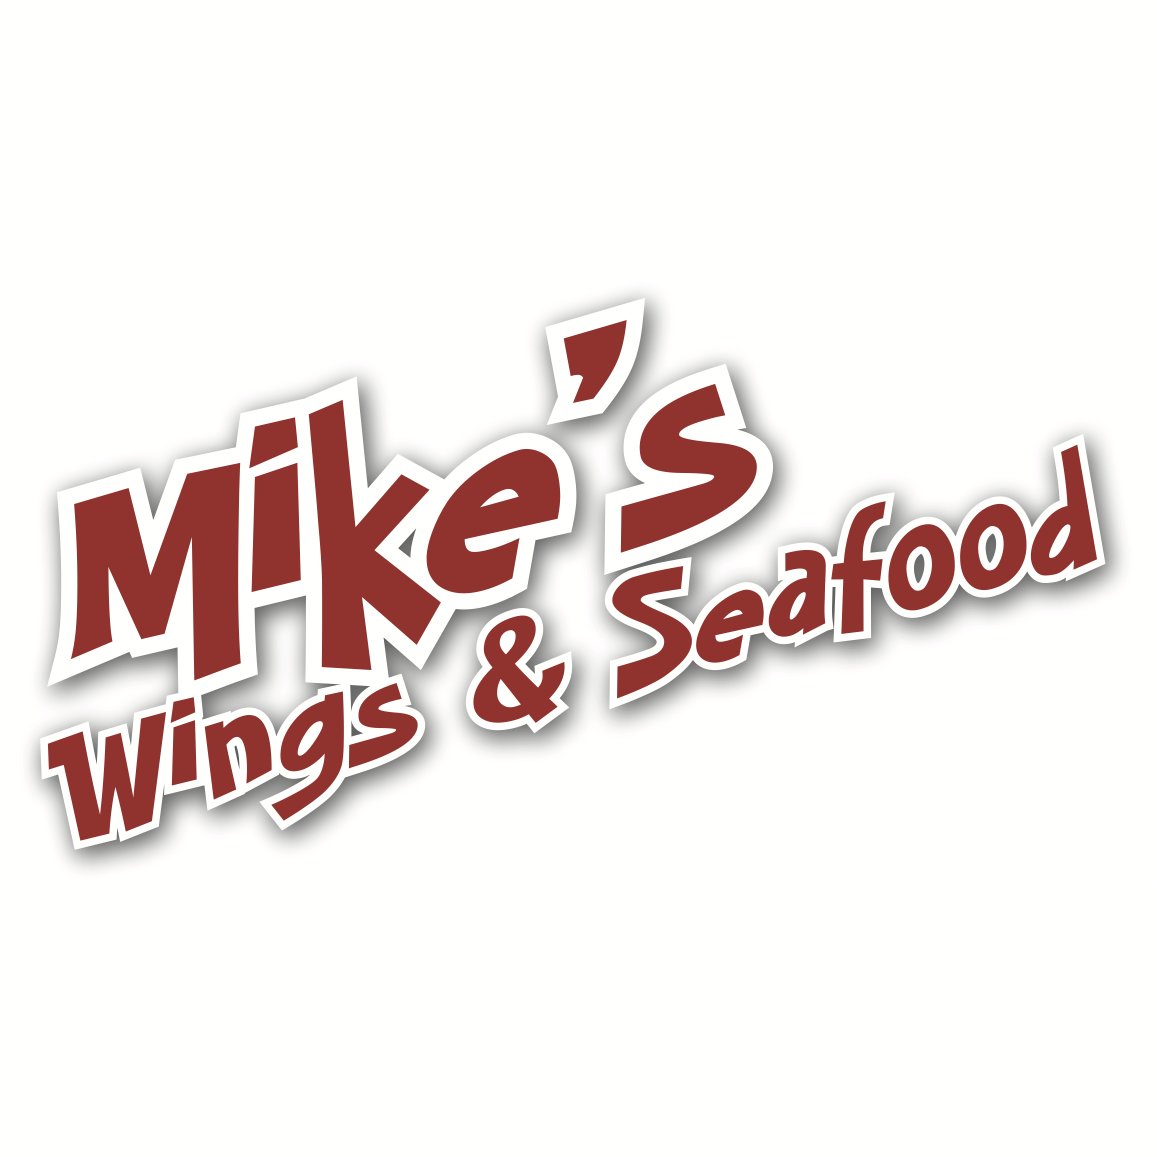 Mike's Wings & Seafood logo